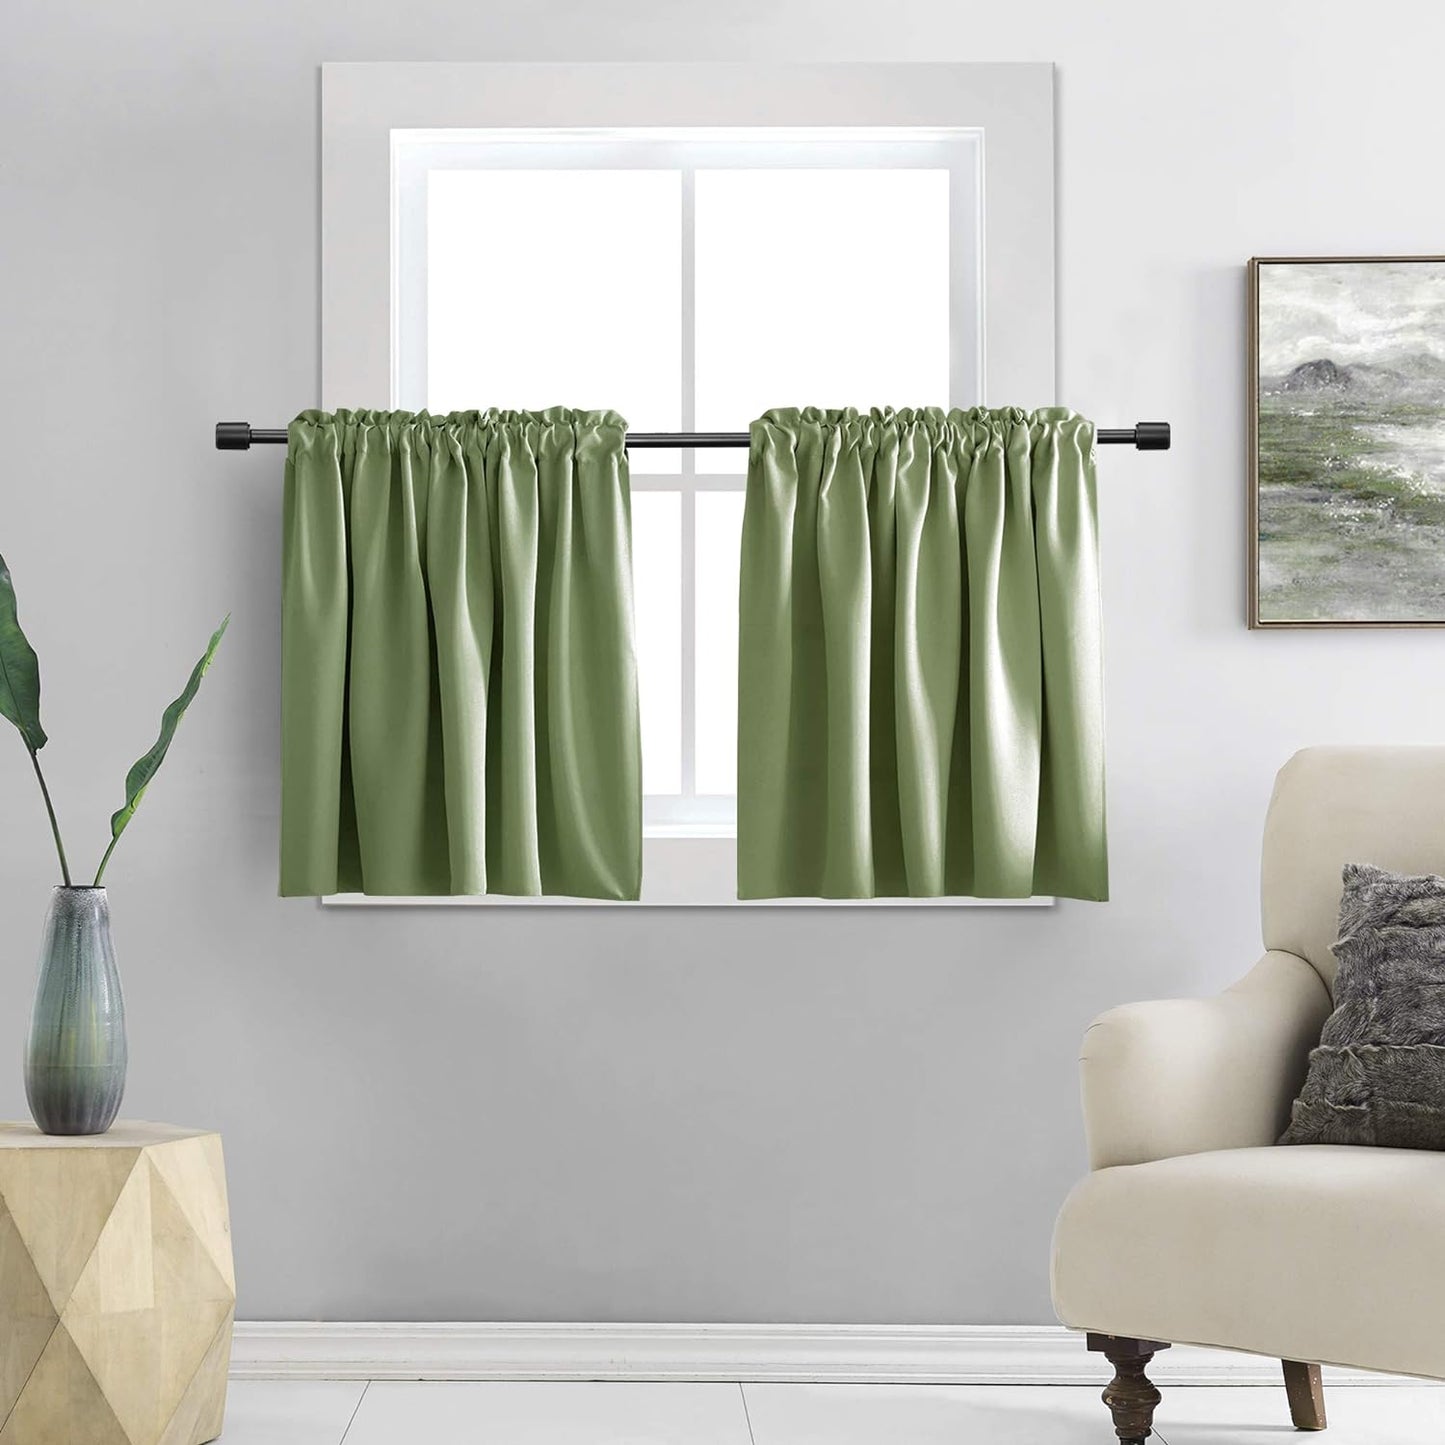 DONREN 24 Inch Length Curtains- 2 Panels Blackout Thermal Insulating Small Curtain Tiers for Bathroom with Rod Pocket (Black,42 Inch Width)  DONREN Sage Green 42" X 30" 